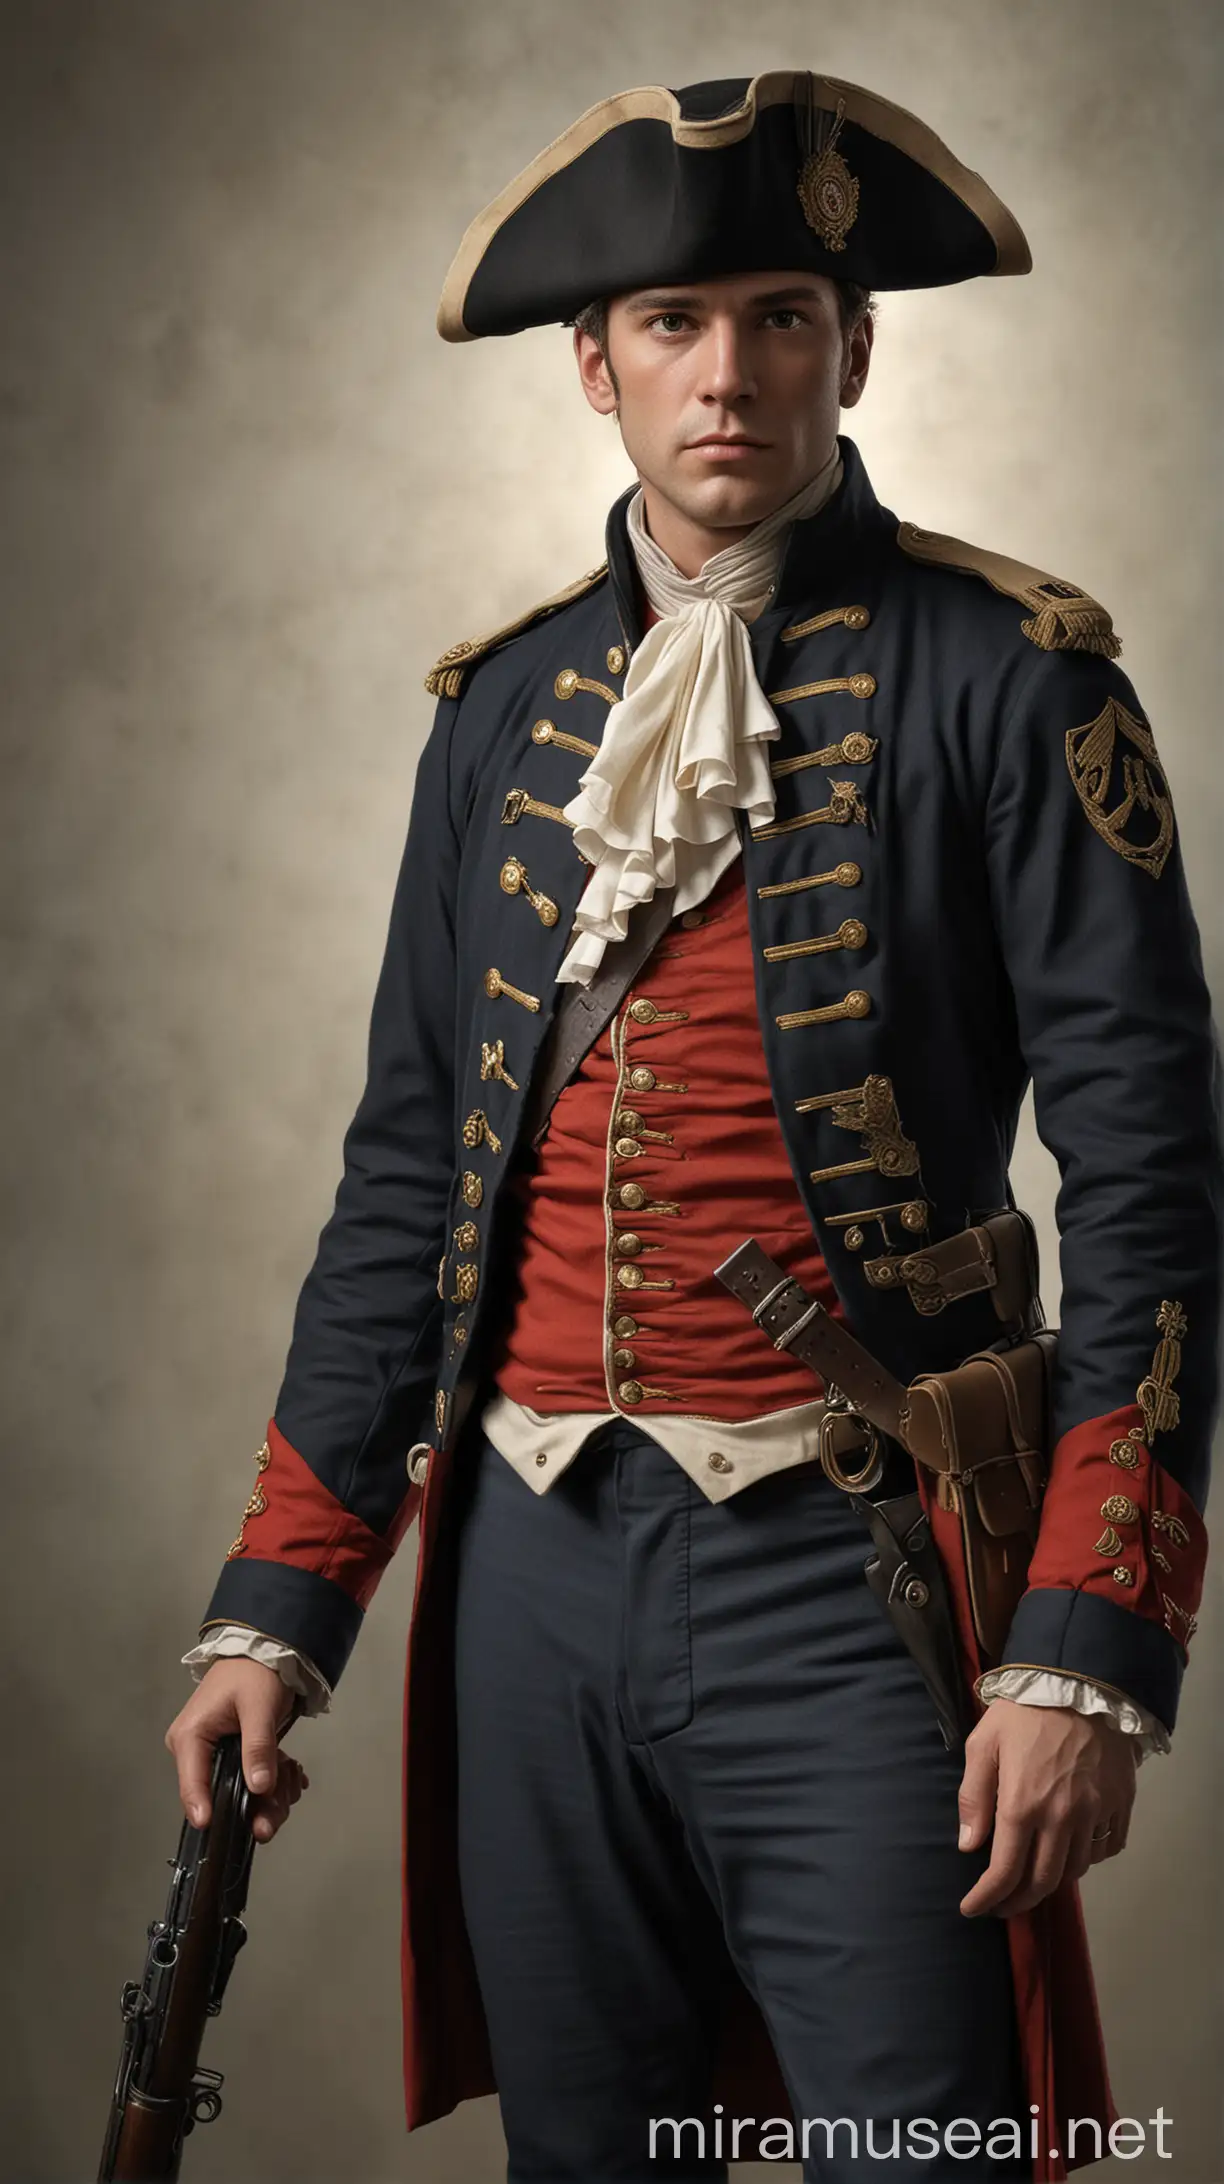 Show Houston as a soldier during the War of 1812, in period-appropriate military attire. hyper realistic